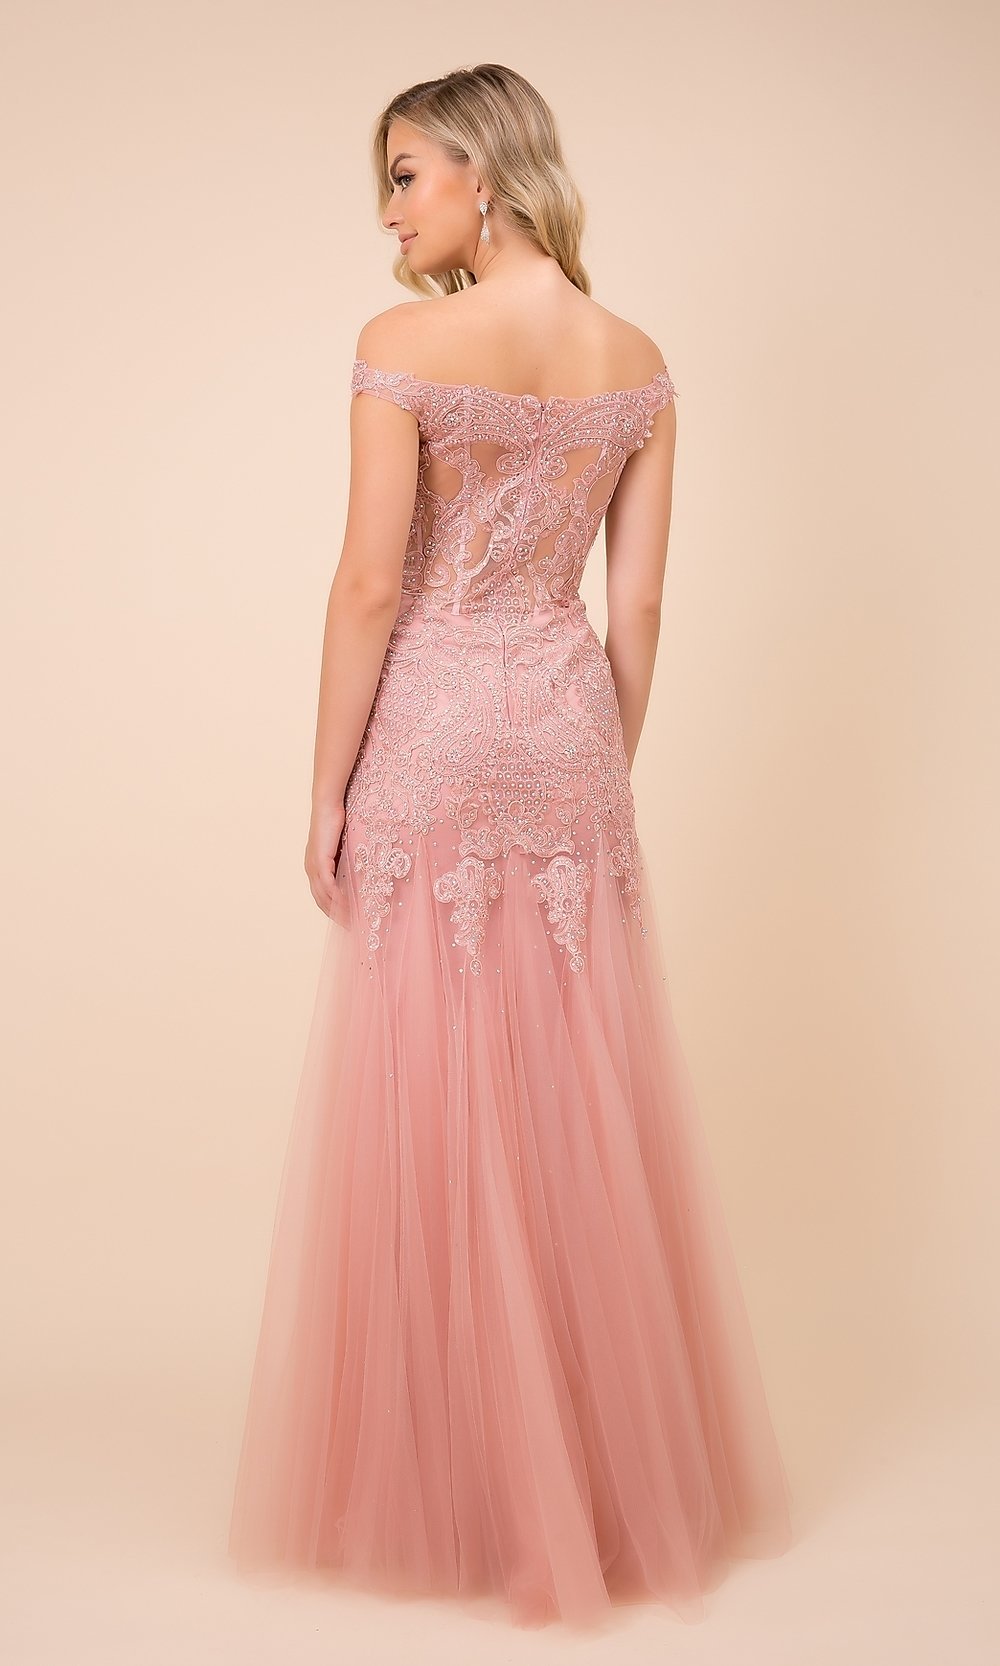  Embroidered Illusion-Bodice Long Mermaid Prom Dress